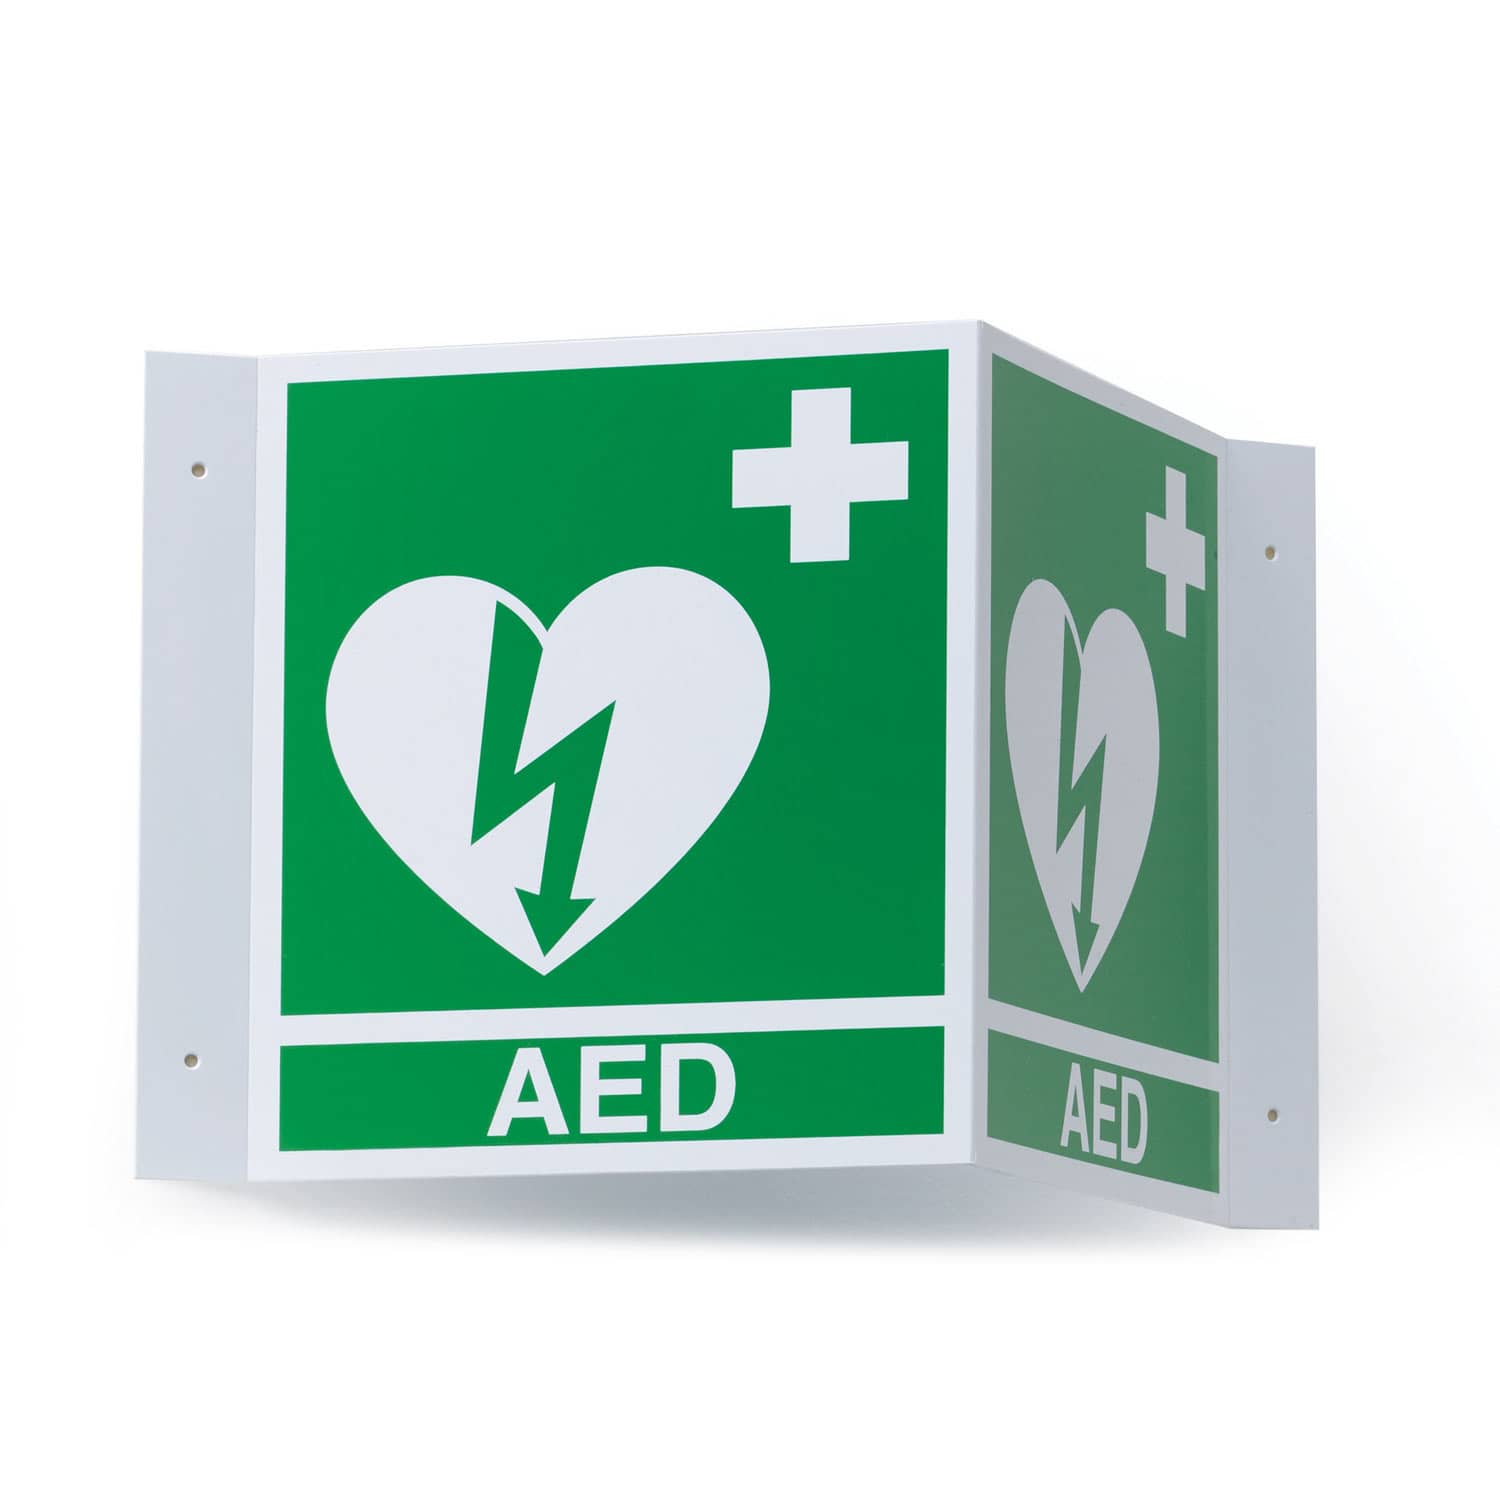 Ilcor Aed 3D Wall Sign For Marking Aed Locations